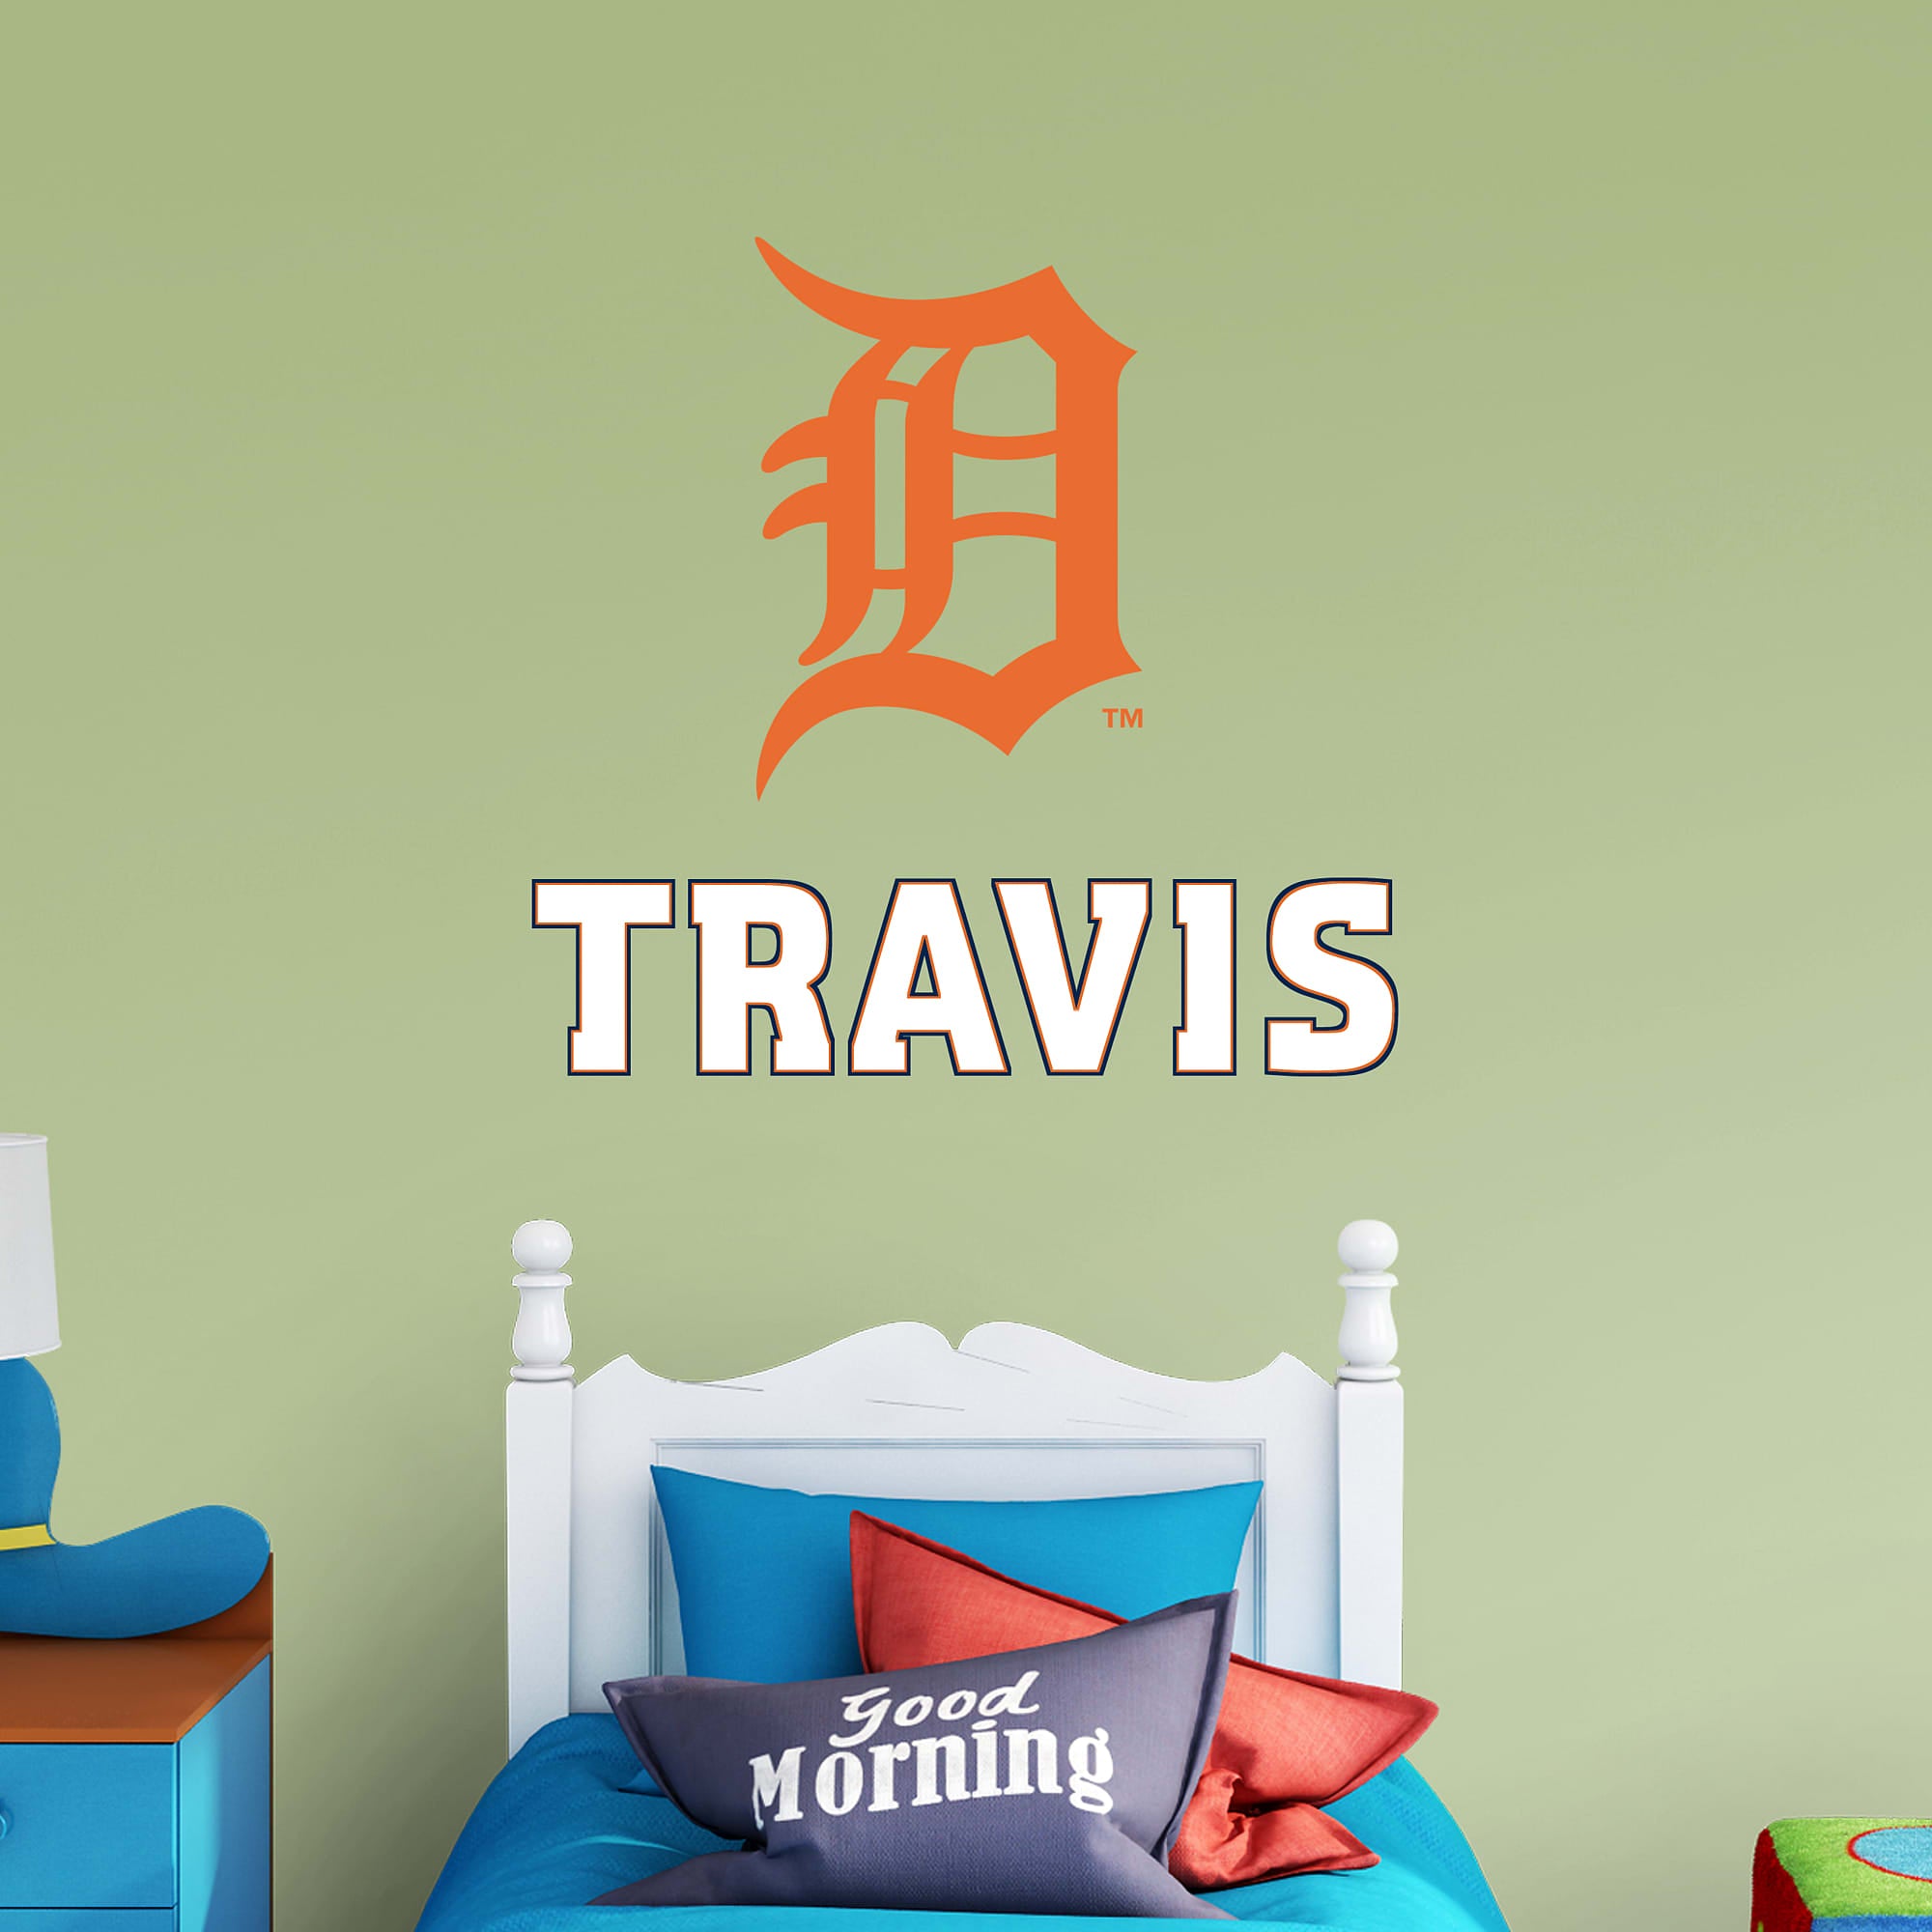 Detroit Tigers: Old English "D" Stacked Personalized Name - Officially Licensed MLB Transfer Decal in Orange/White (52"W x 39.5"